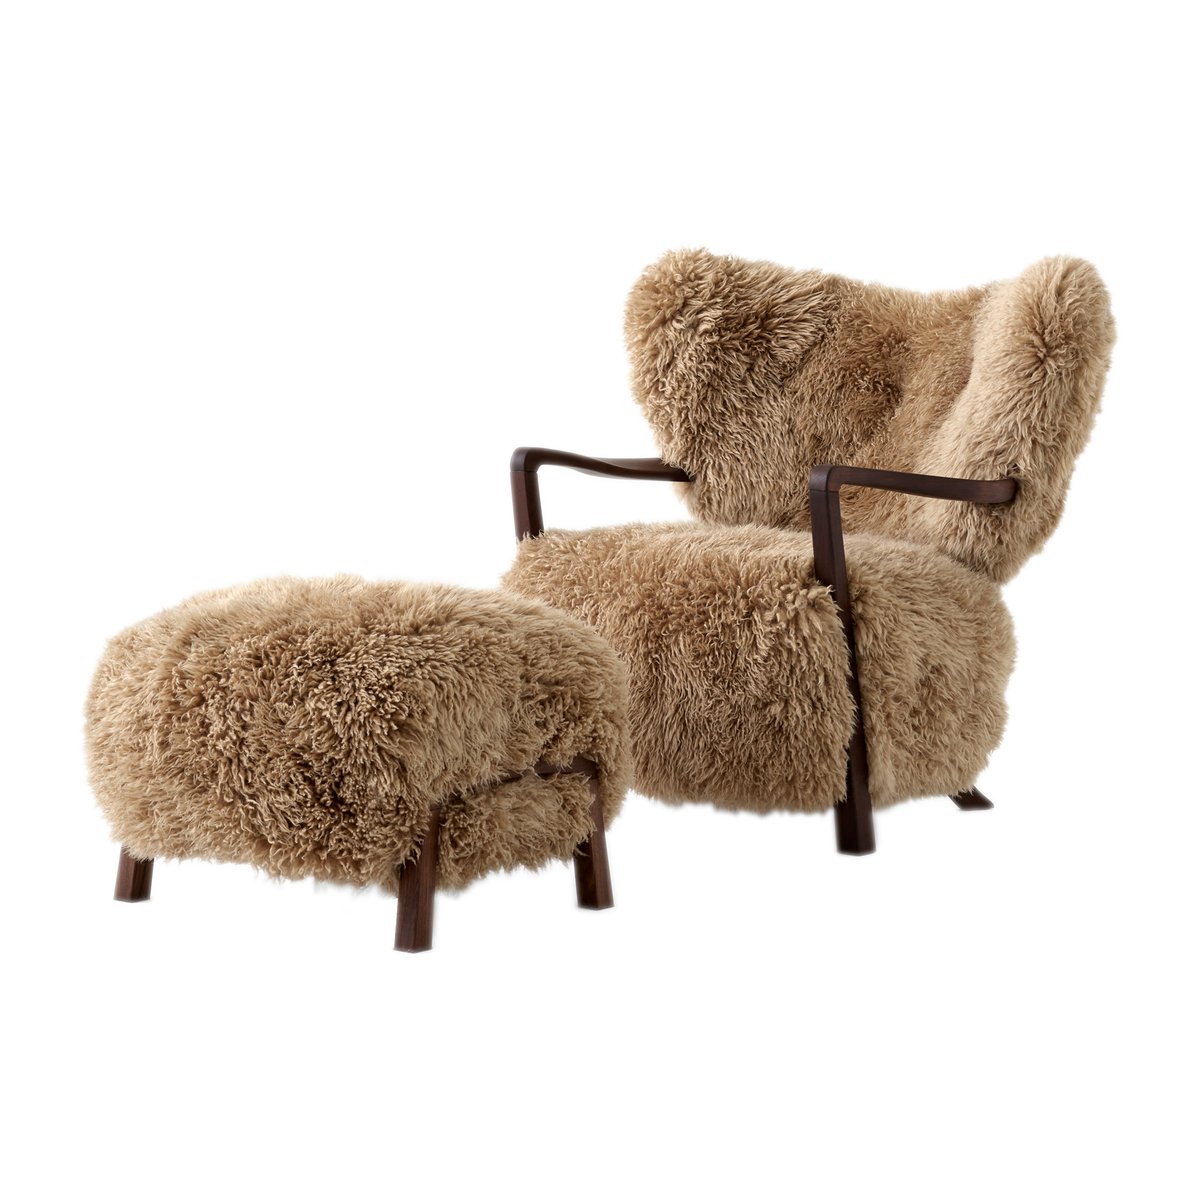 &Tradition Wulff Lounge Chair ATD2 fauteuil incl. poef ATD3 Geolied walnoot-Sheepskin honey